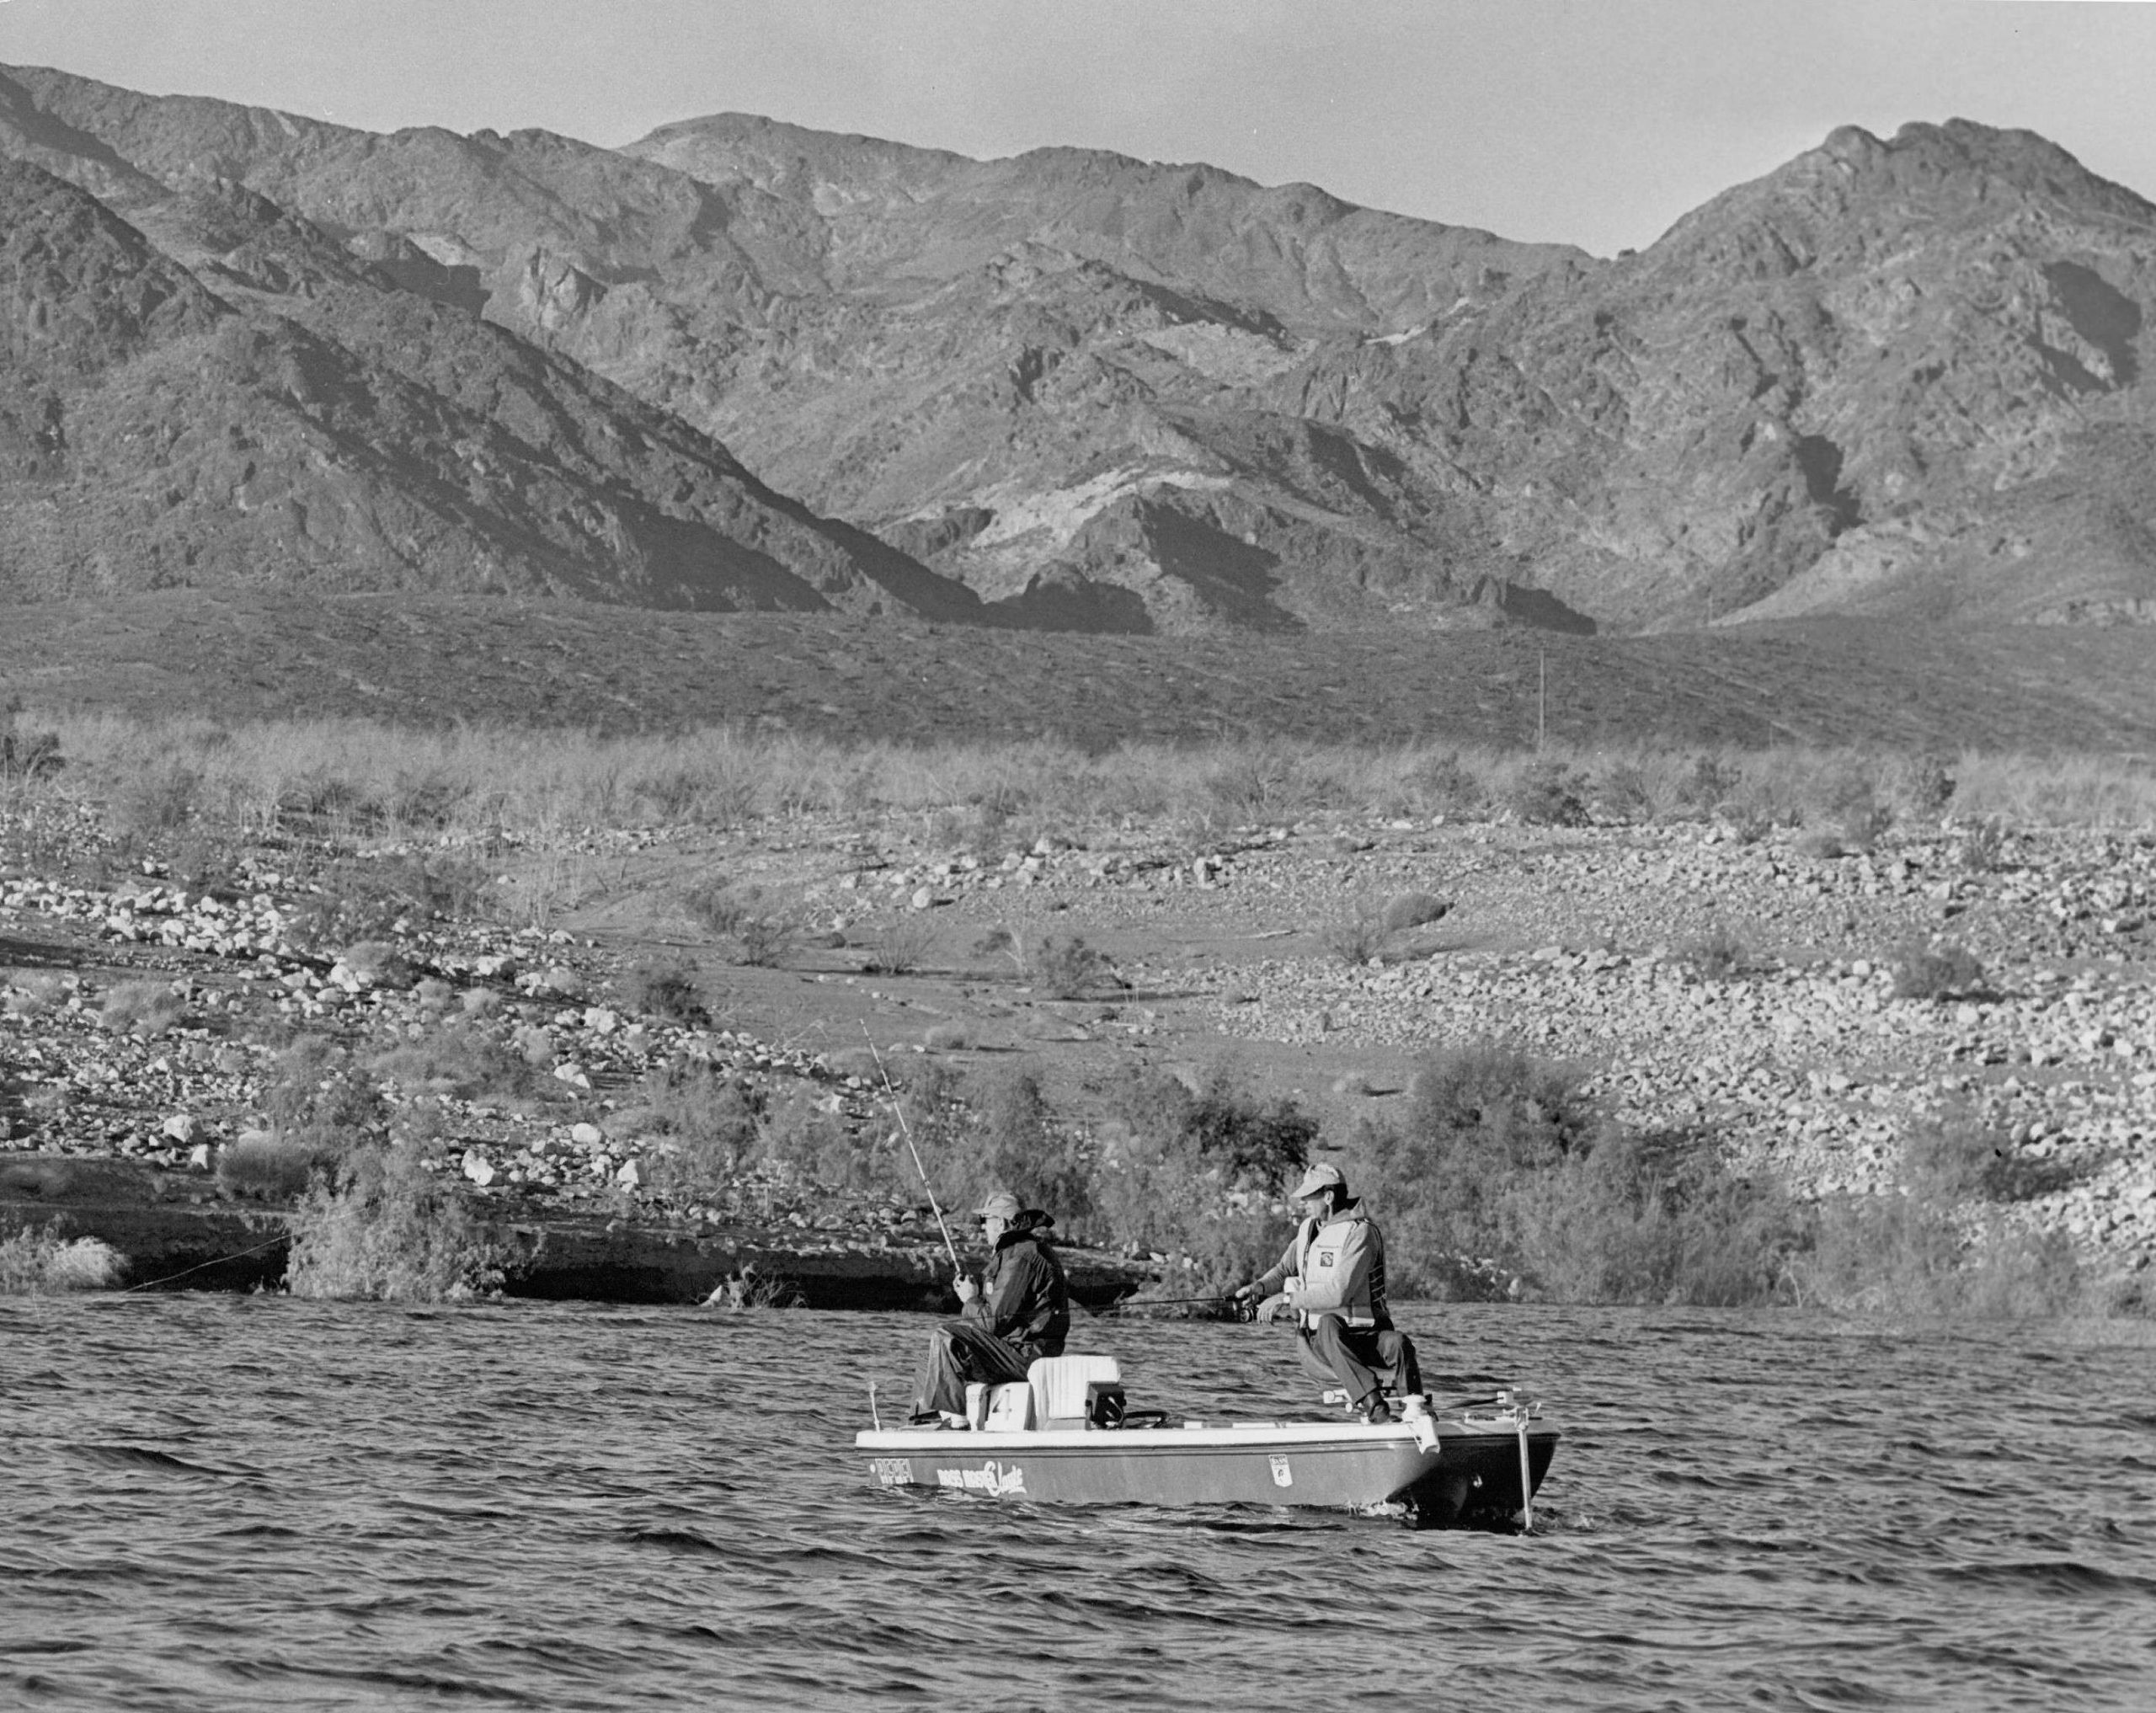 The rocky, rugged shoreline of Lake Mead was full of points and coves, and salt cedars and cattails ran the length of the coves.